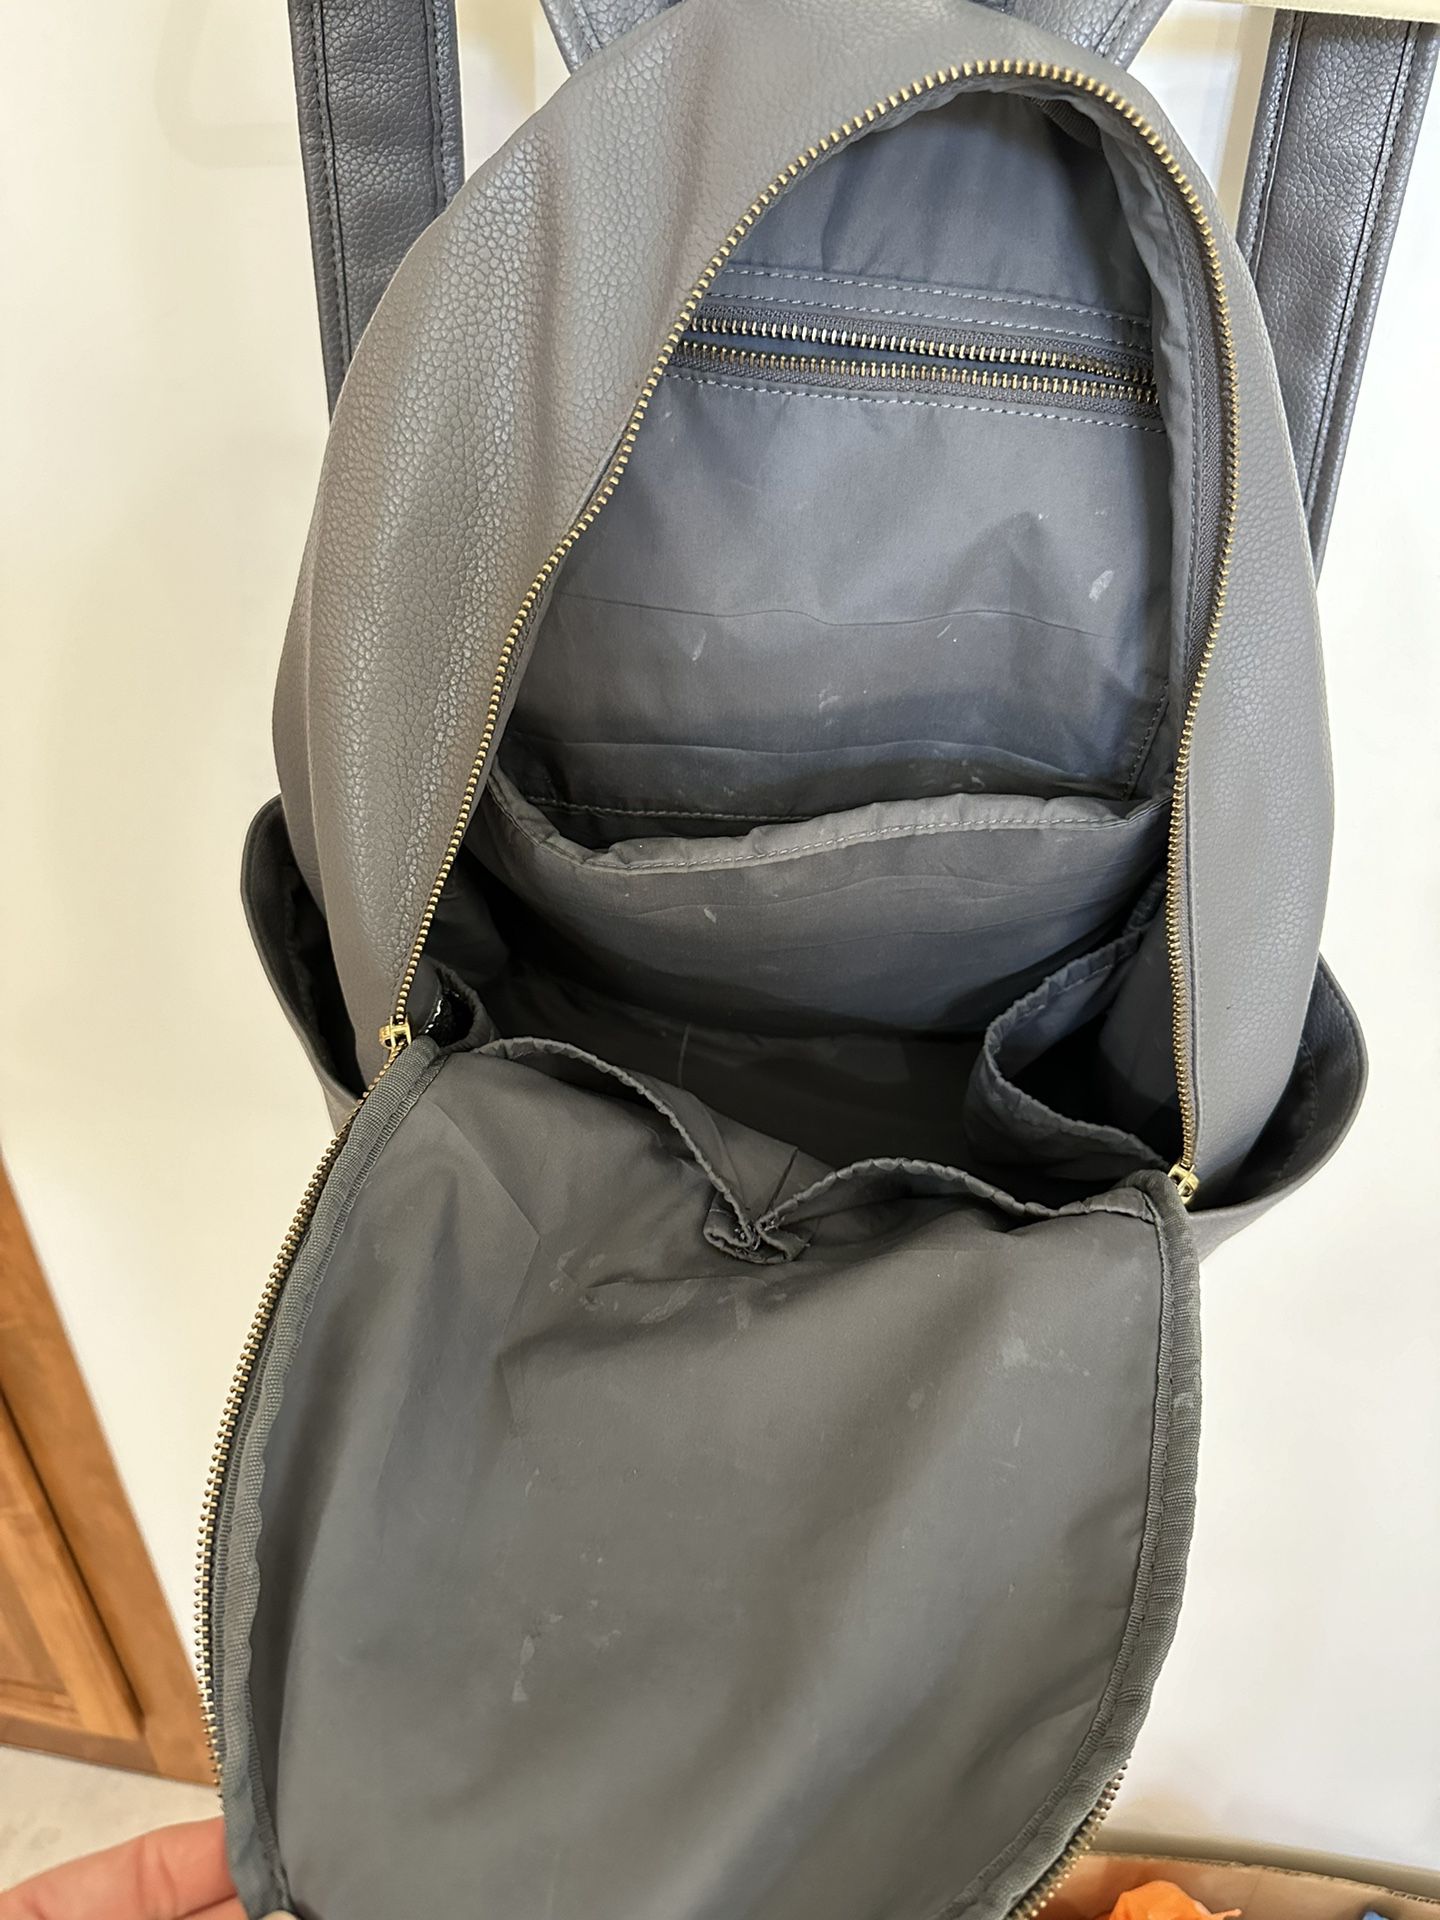 Freshly Picked Stone Classic City Backpack